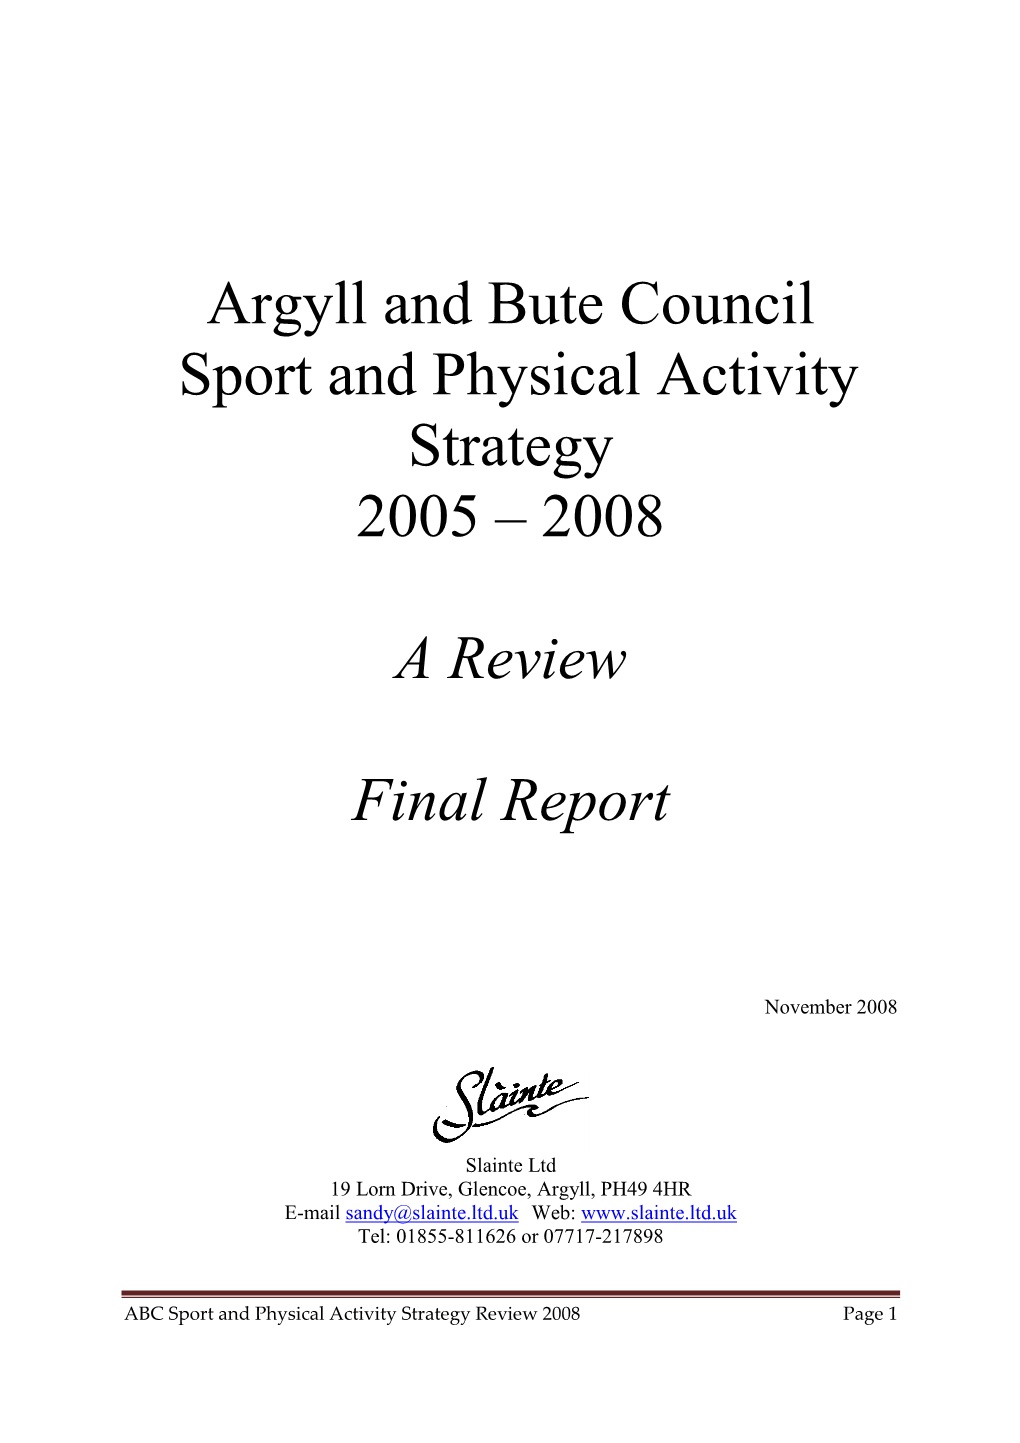 Argyll and Bute Council Sport and Physical Activity Strategy 2005 – 2008